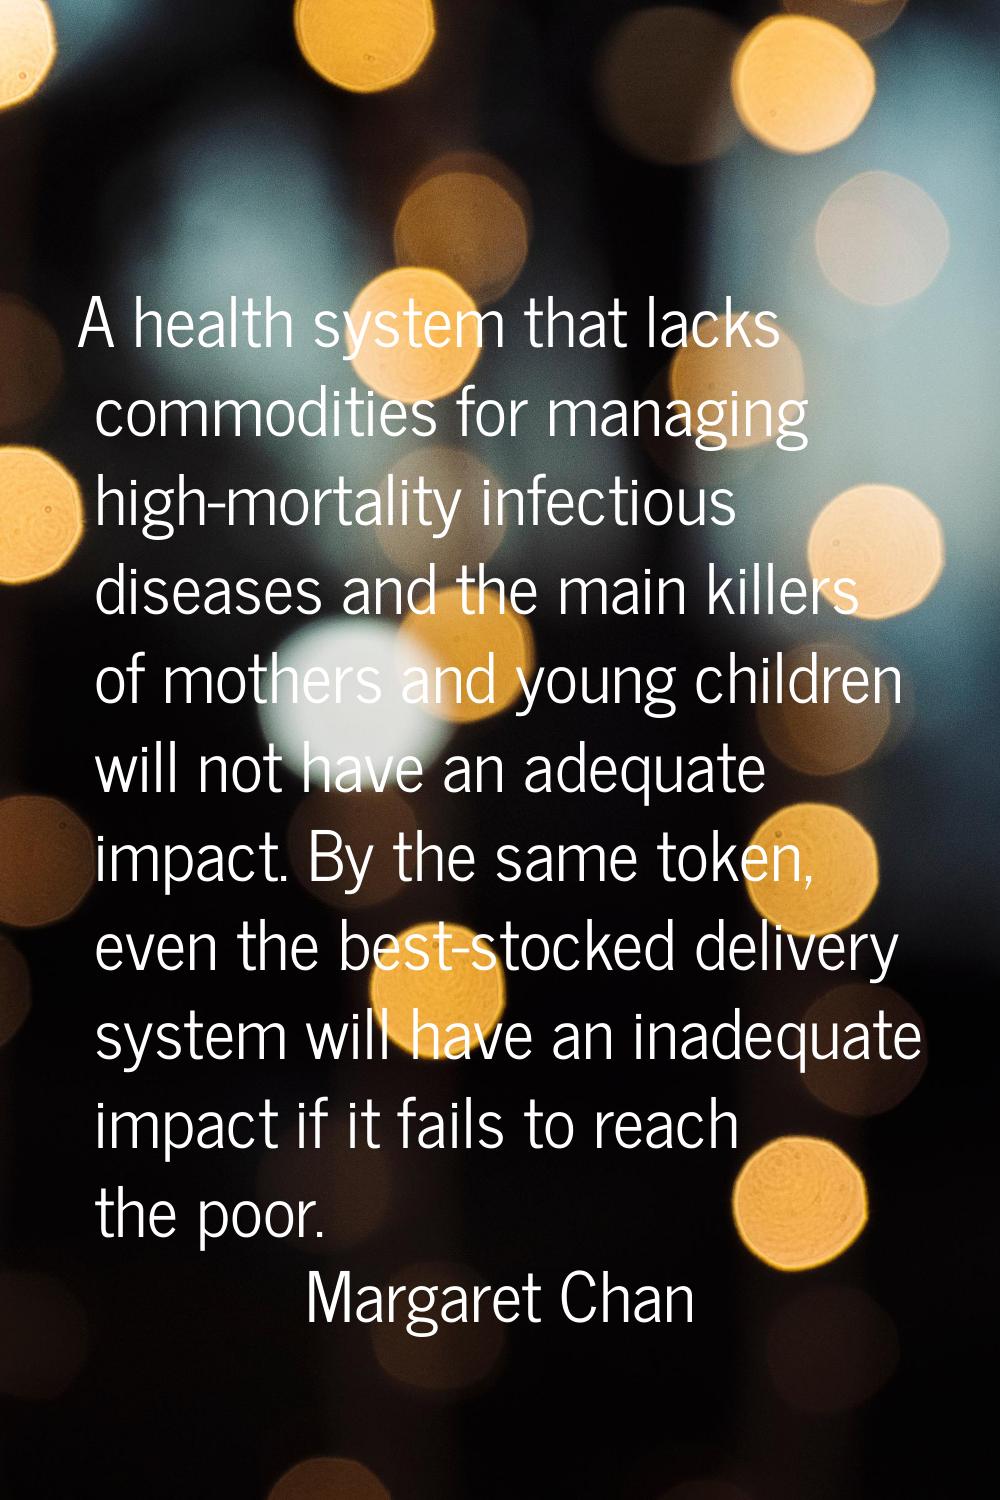 A health system that lacks commodities for managing high-mortality infectious diseases and the main